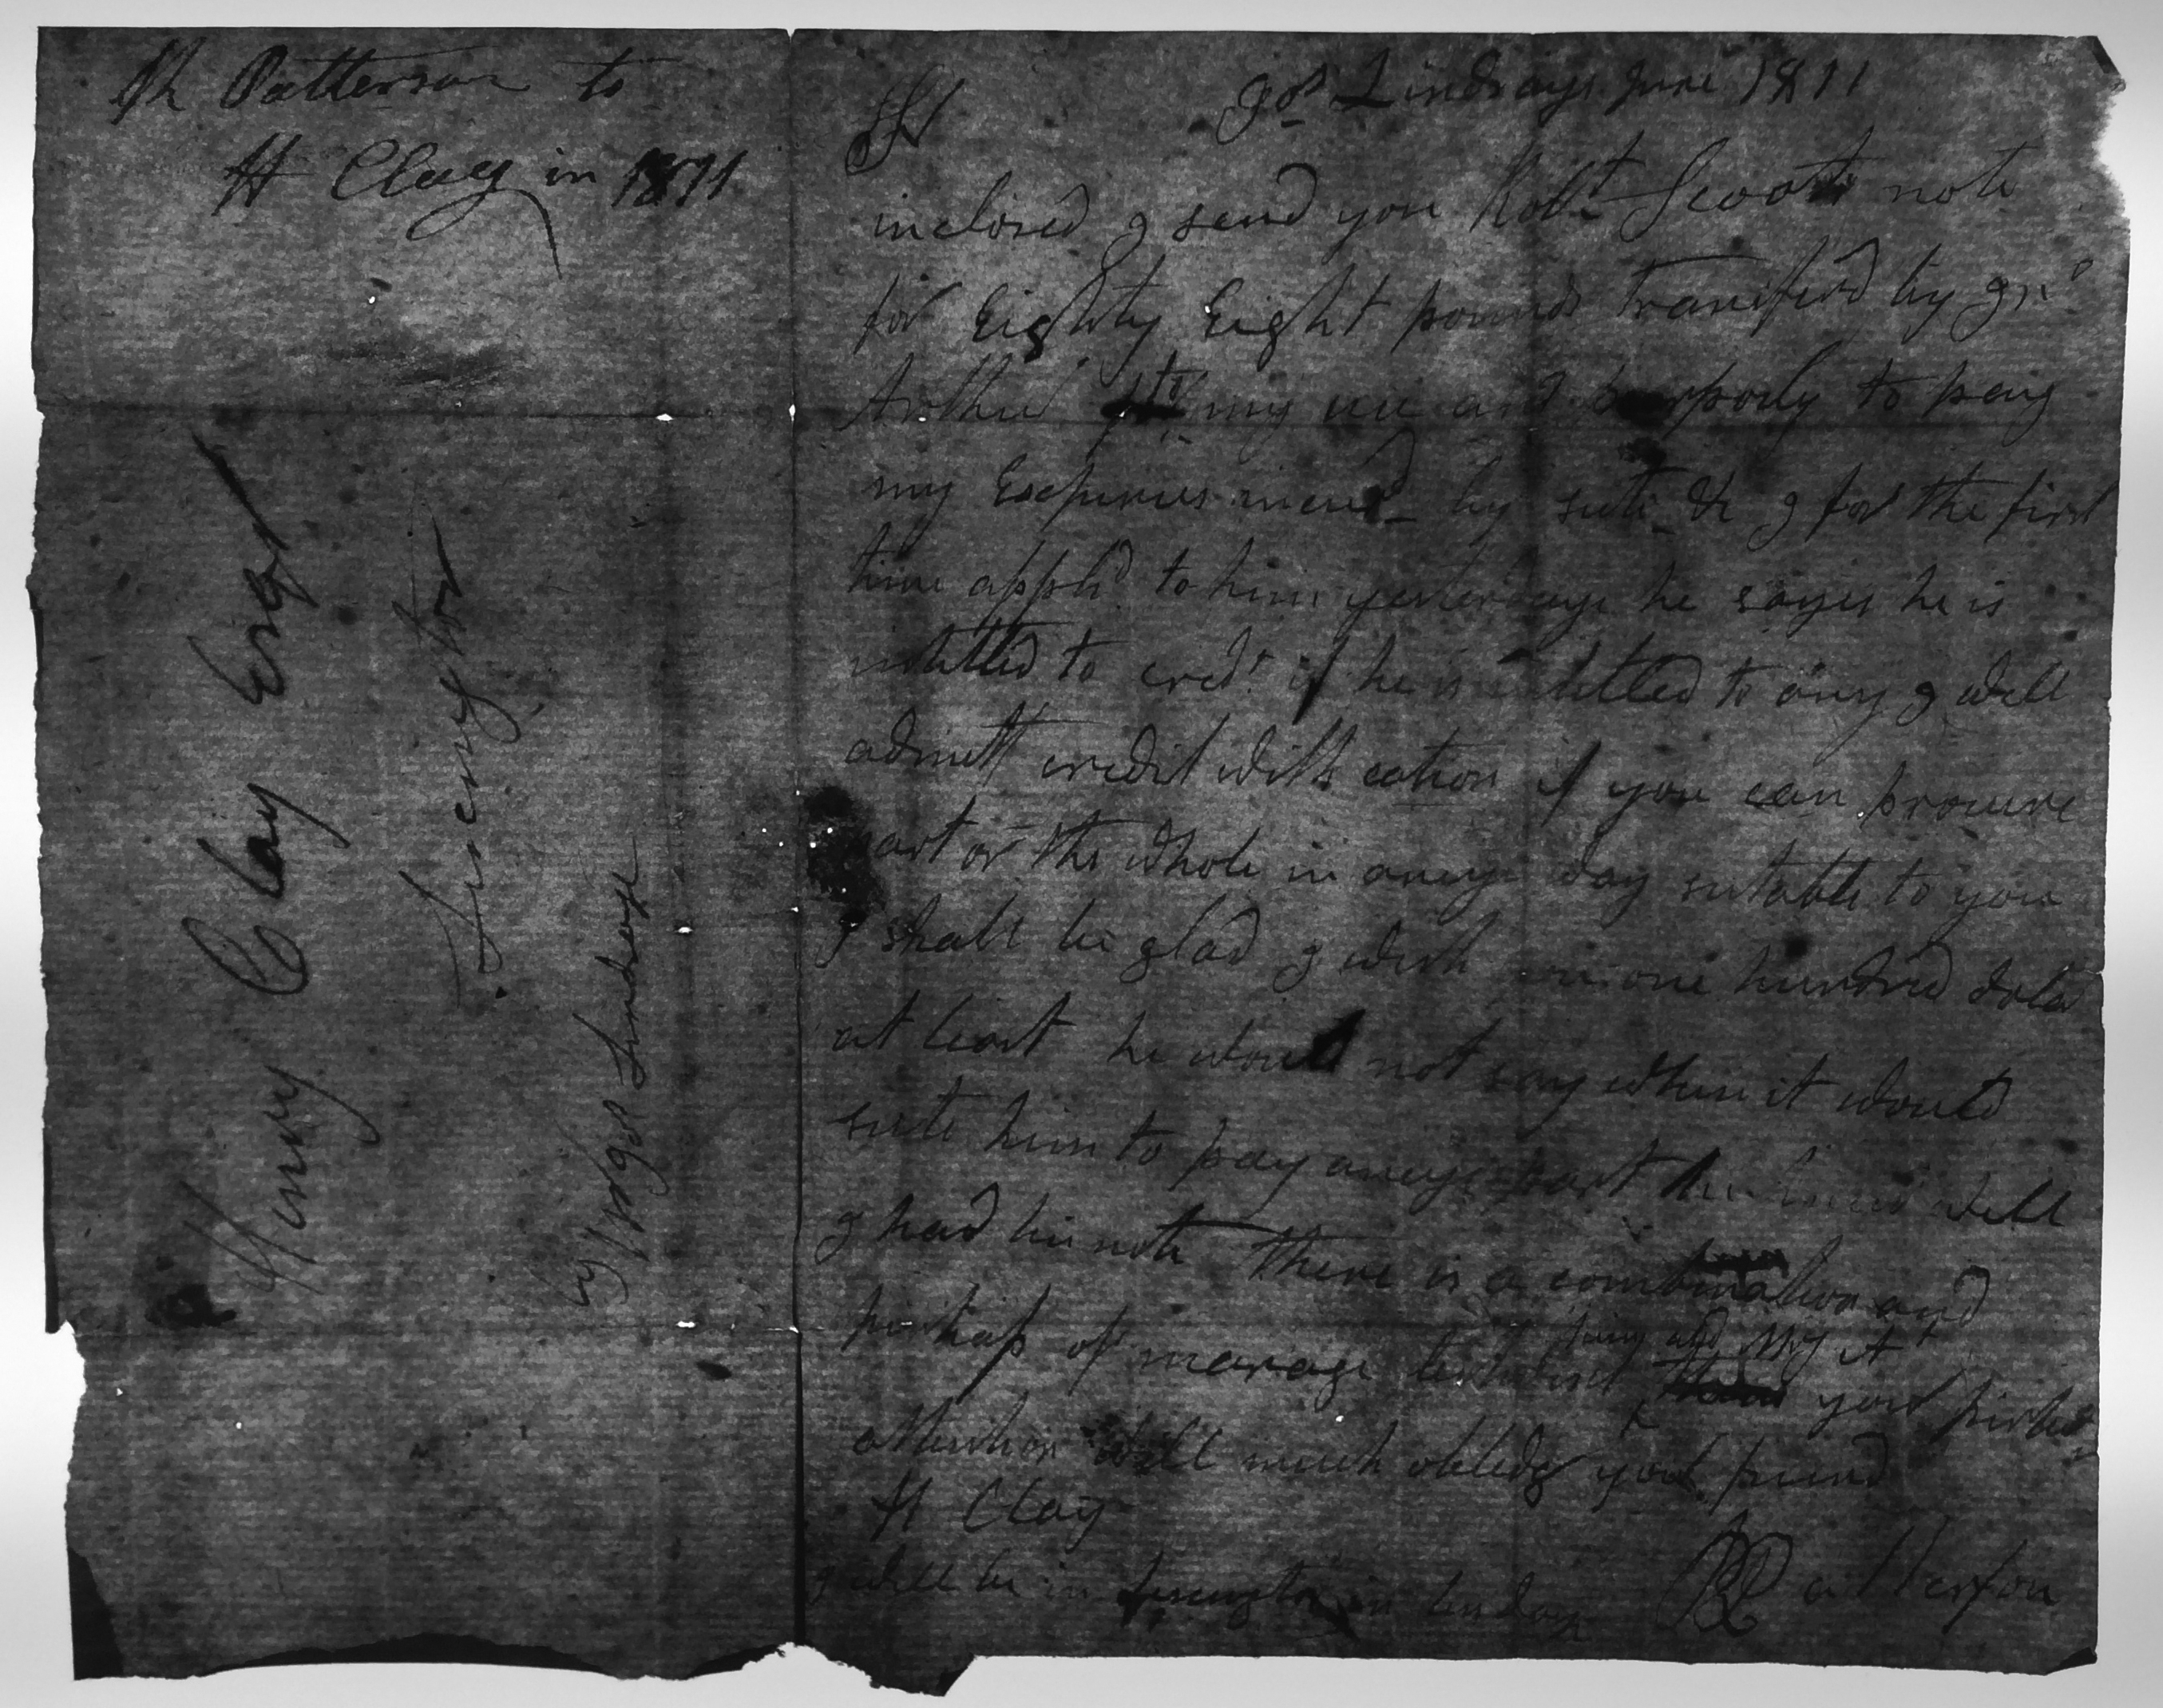 Col. Robert Patterson to Henry Clay, June 1811, showing chain lines (MS-236, Box 1, Folder 1)